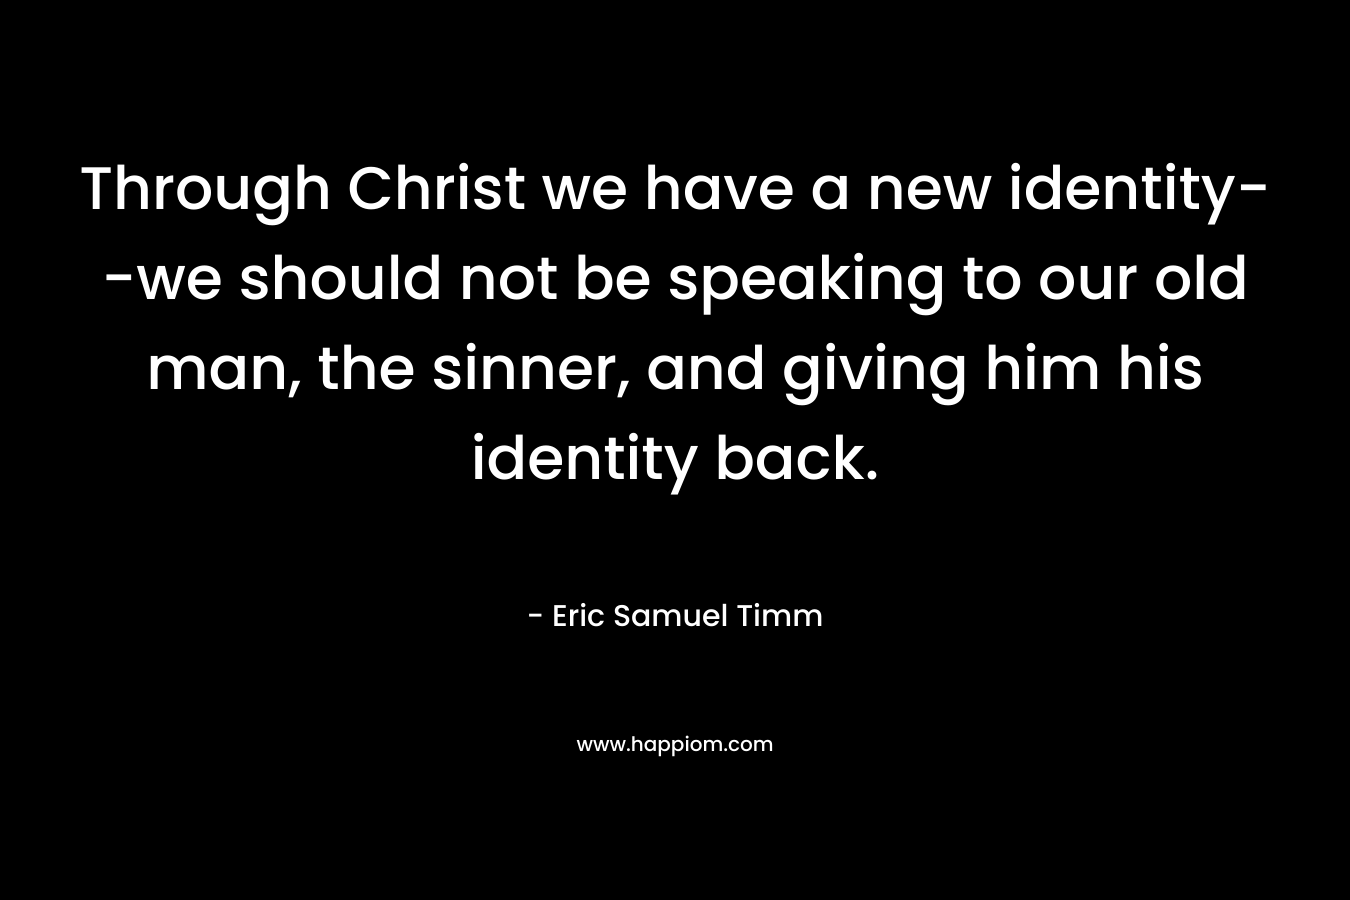 Through Christ we have a new identity–we should not be speaking to our old man, the sinner, and giving him his identity back. – Eric Samuel Timm